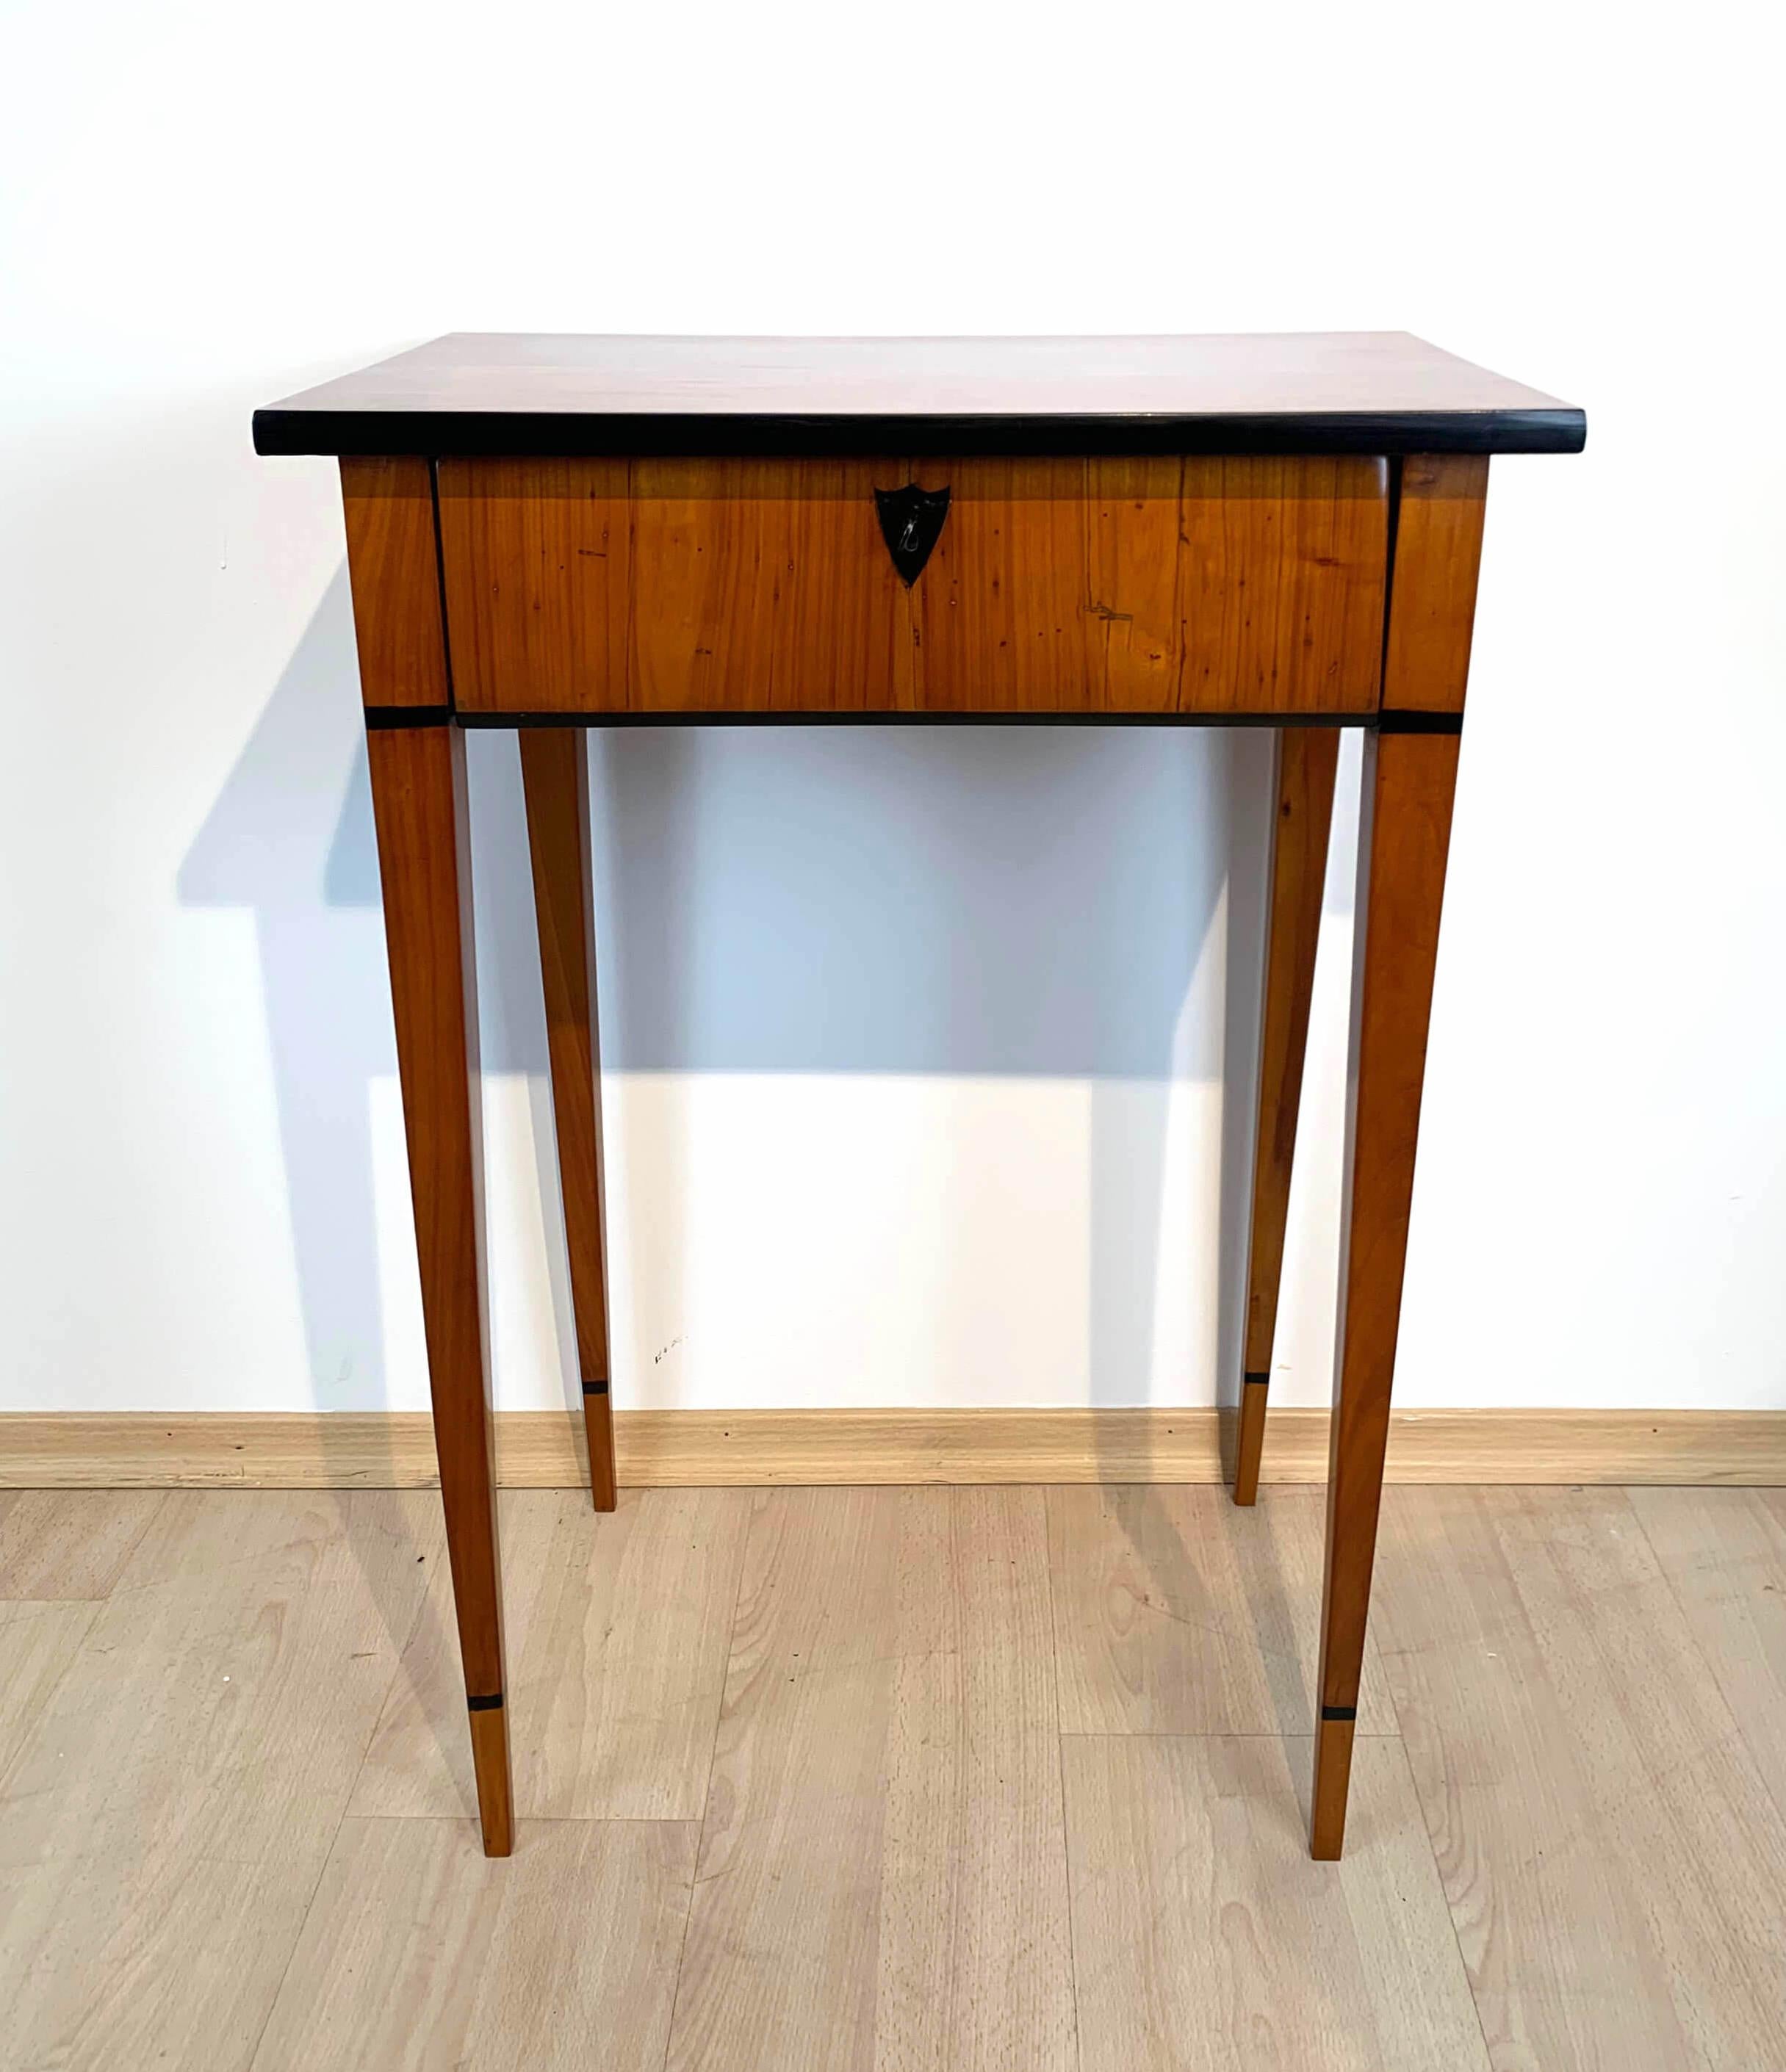 Early 19th Century Biedermeier Side Table with Drawer, Cherry Veneer, South Germany, circa 1820